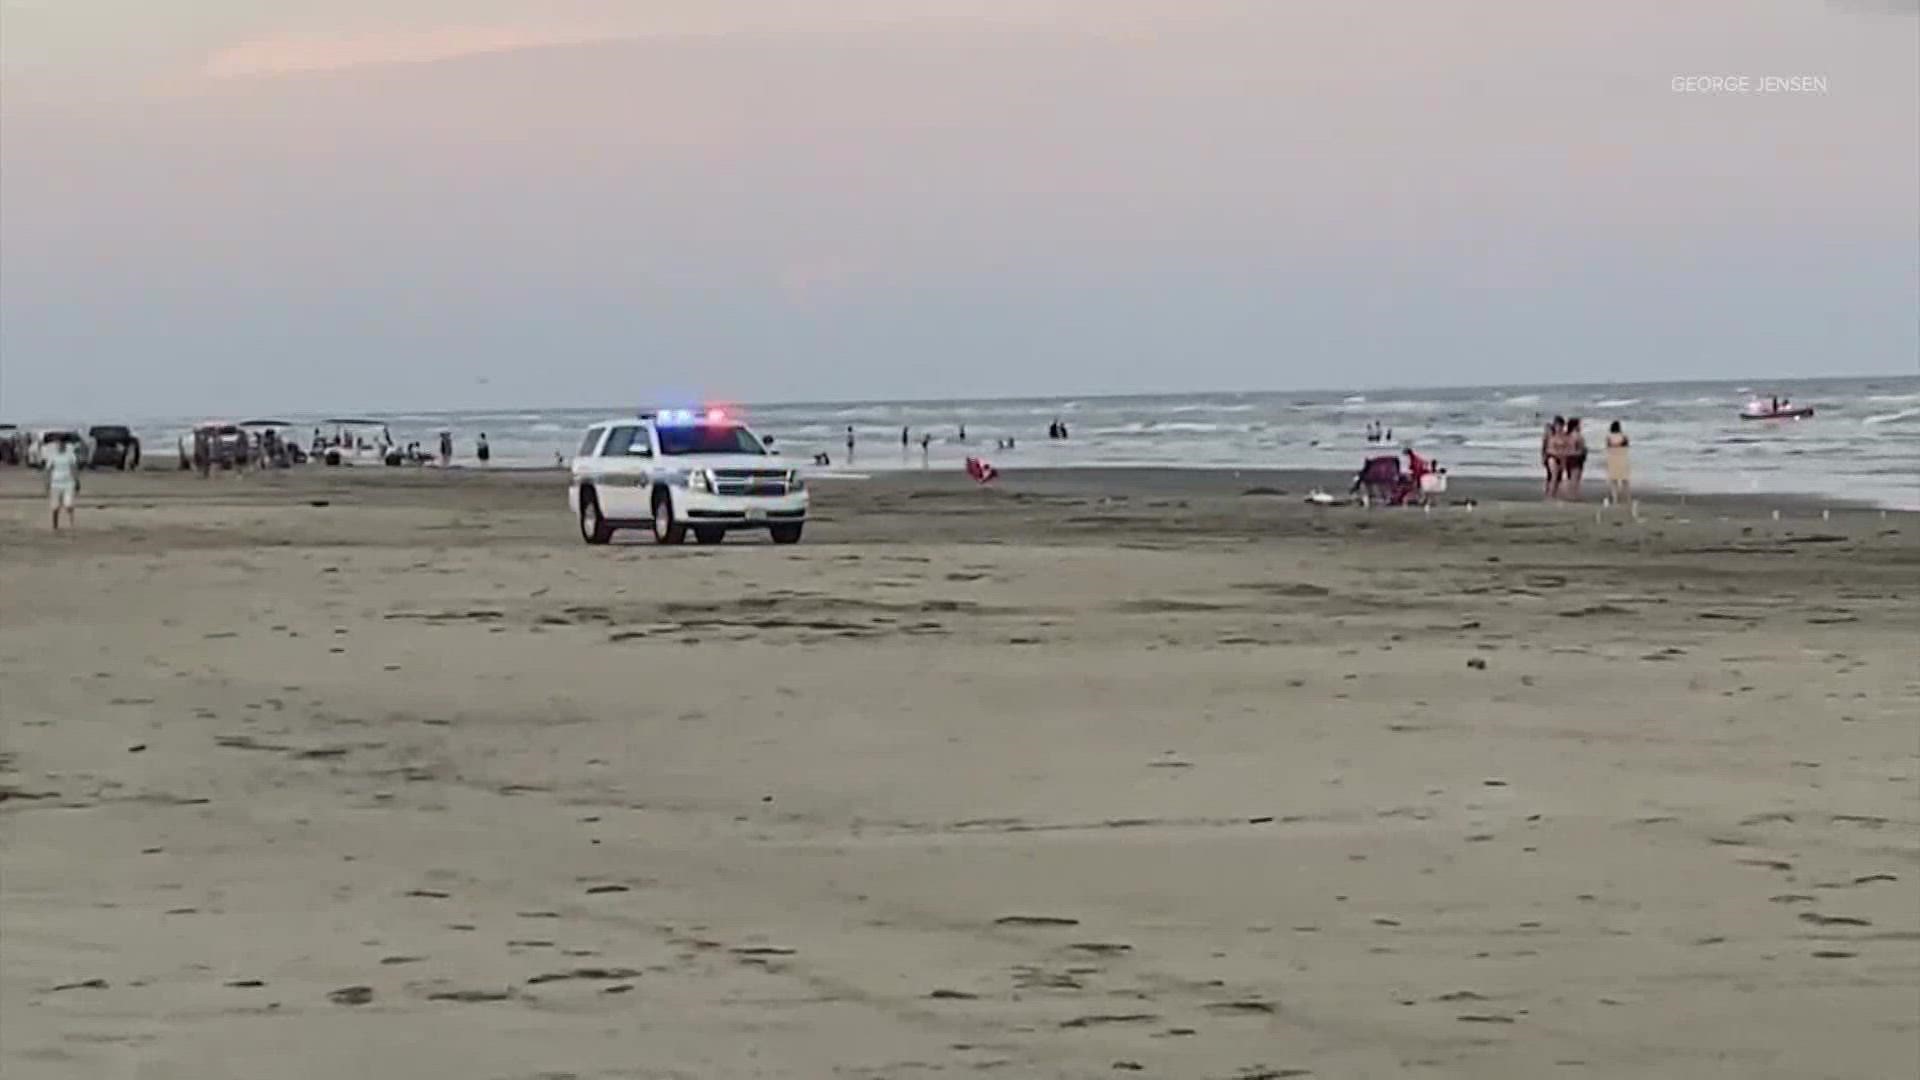 A teen was pulled from the waters in Galveston on Sunday. Authorities said he was taken to an area hospital in unknown condition.